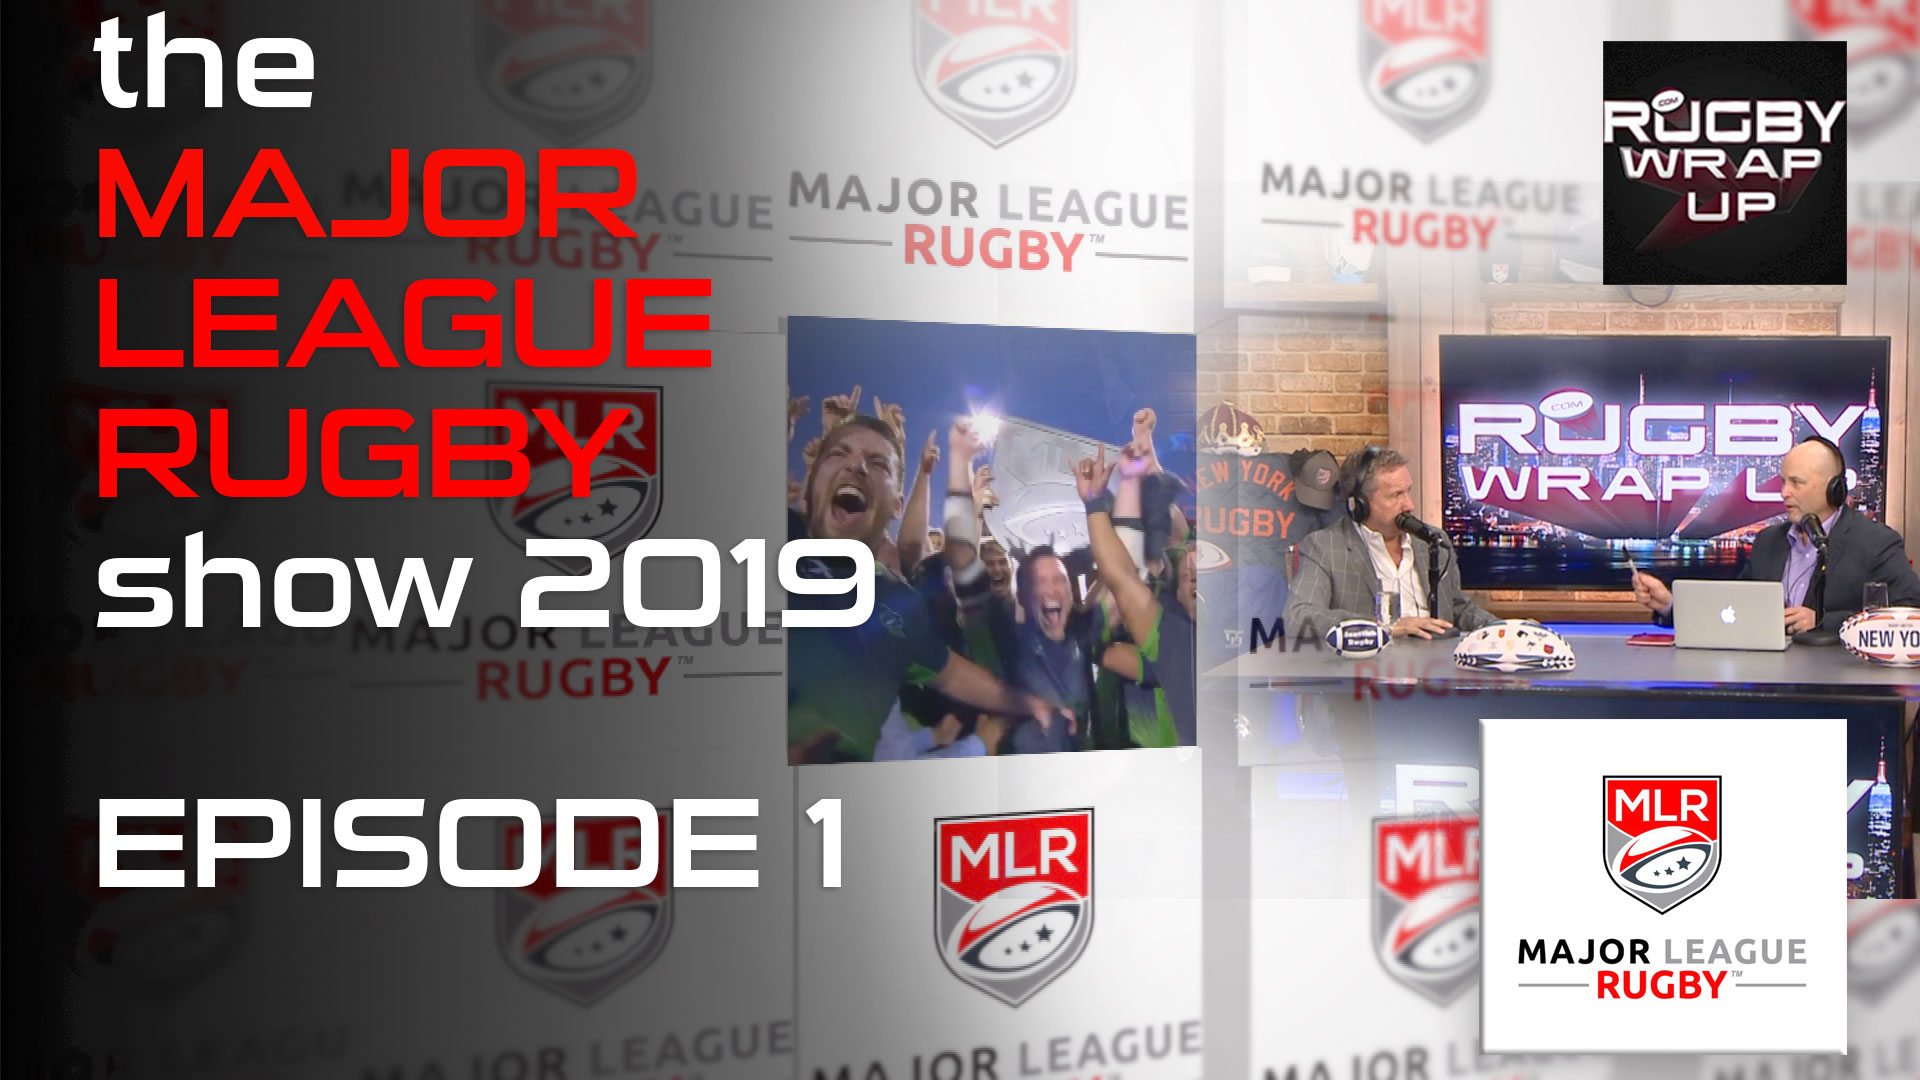 MAJOR-LEAGUE-RUGBY, Rugby_Wrap_Up, Steve_Lewis, Matt_McCarthy, EPISODE-1, Rugby_Wrap_Up